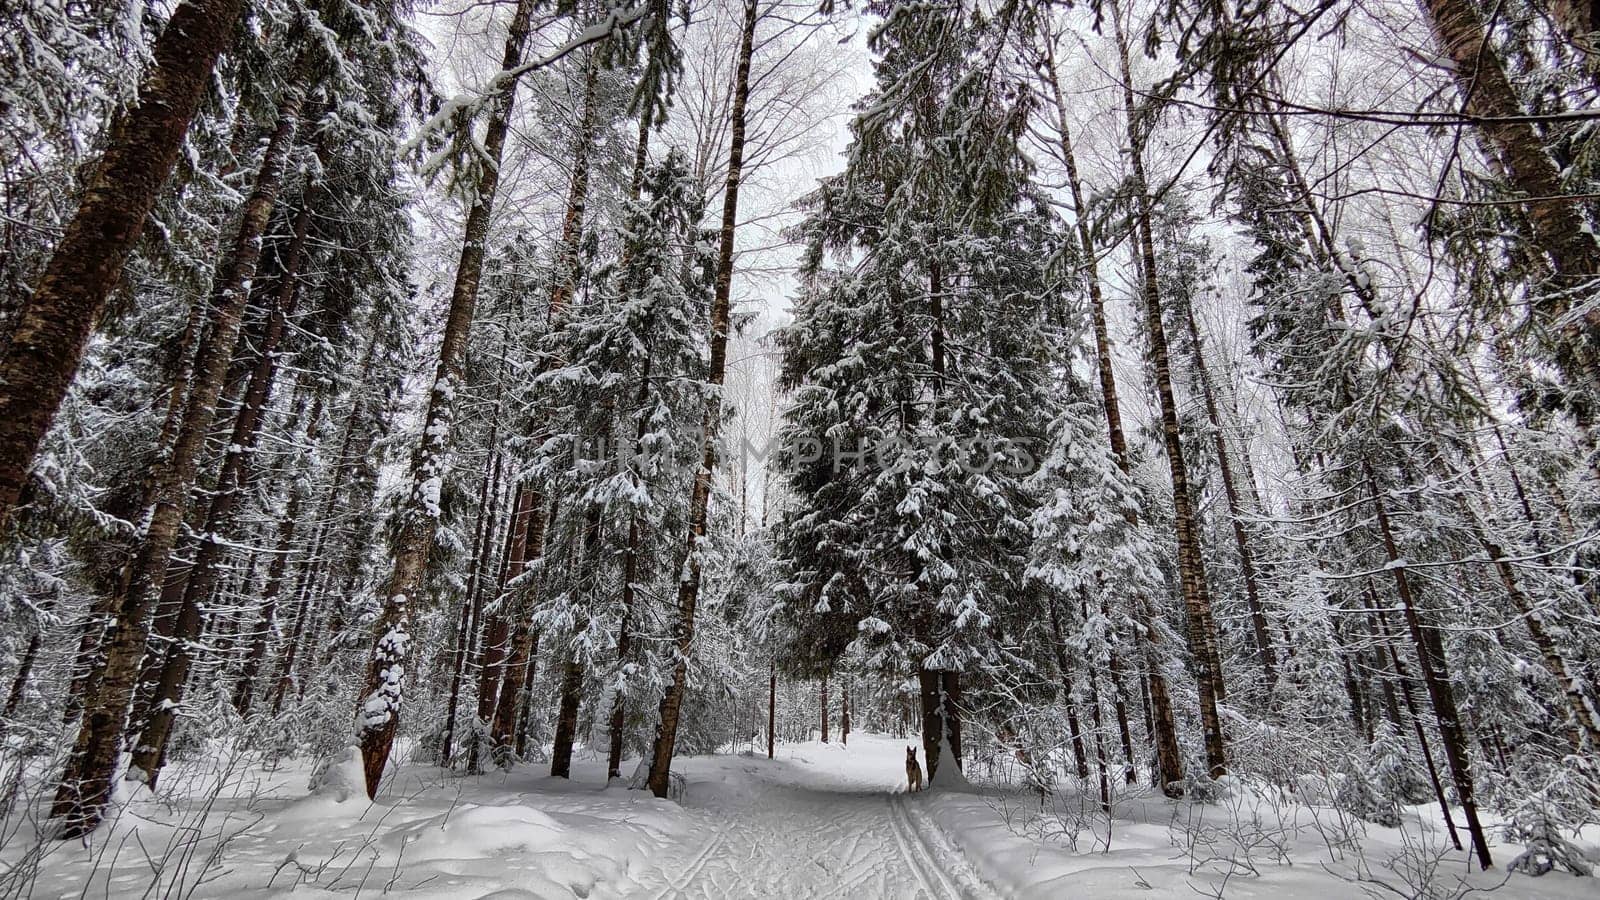 Snow covered trees in the winter forest with road in a cold day. White and black landscape